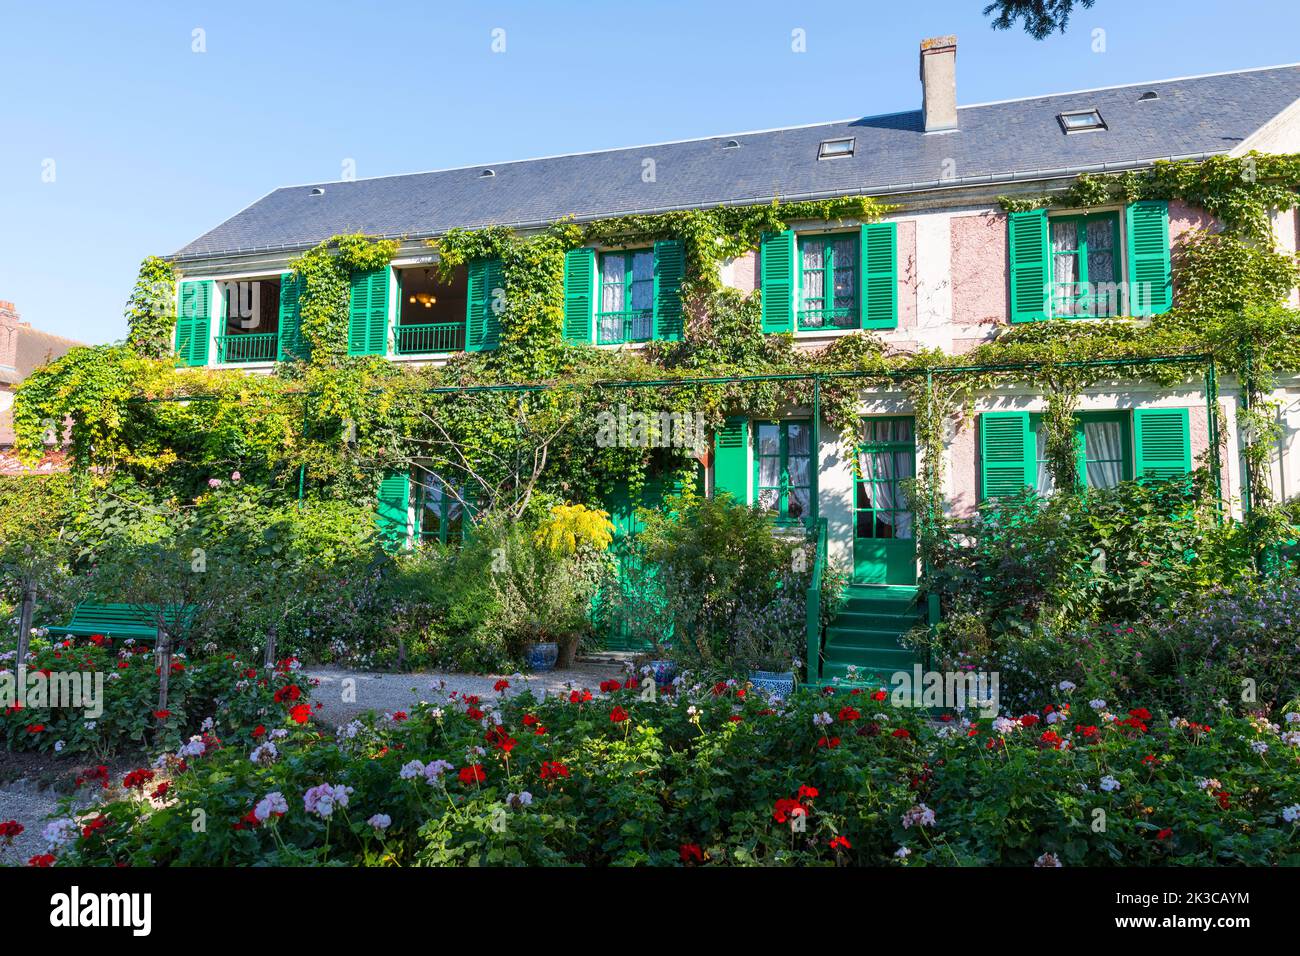 the house of the painter Monet in Giverny france Stock Photo